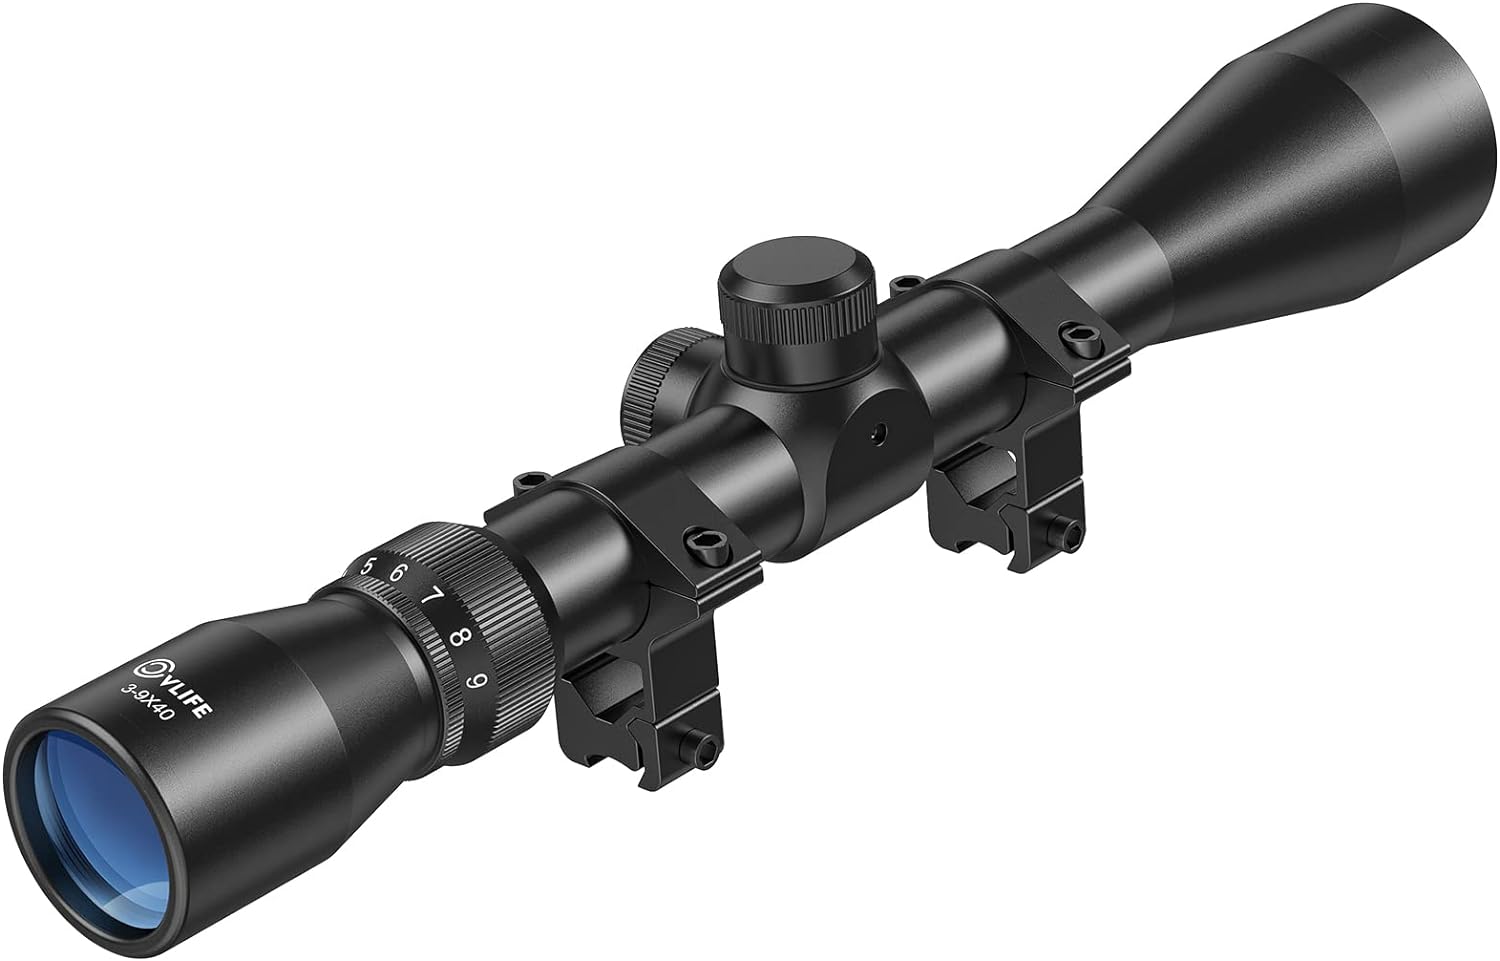 CVLIFE 3-9x40 Optics R4 Reticle Crosshair Scope with Free Mounts - CVLIFE 3-9x40 Optics R4 Reticle Crosshair Scope Review